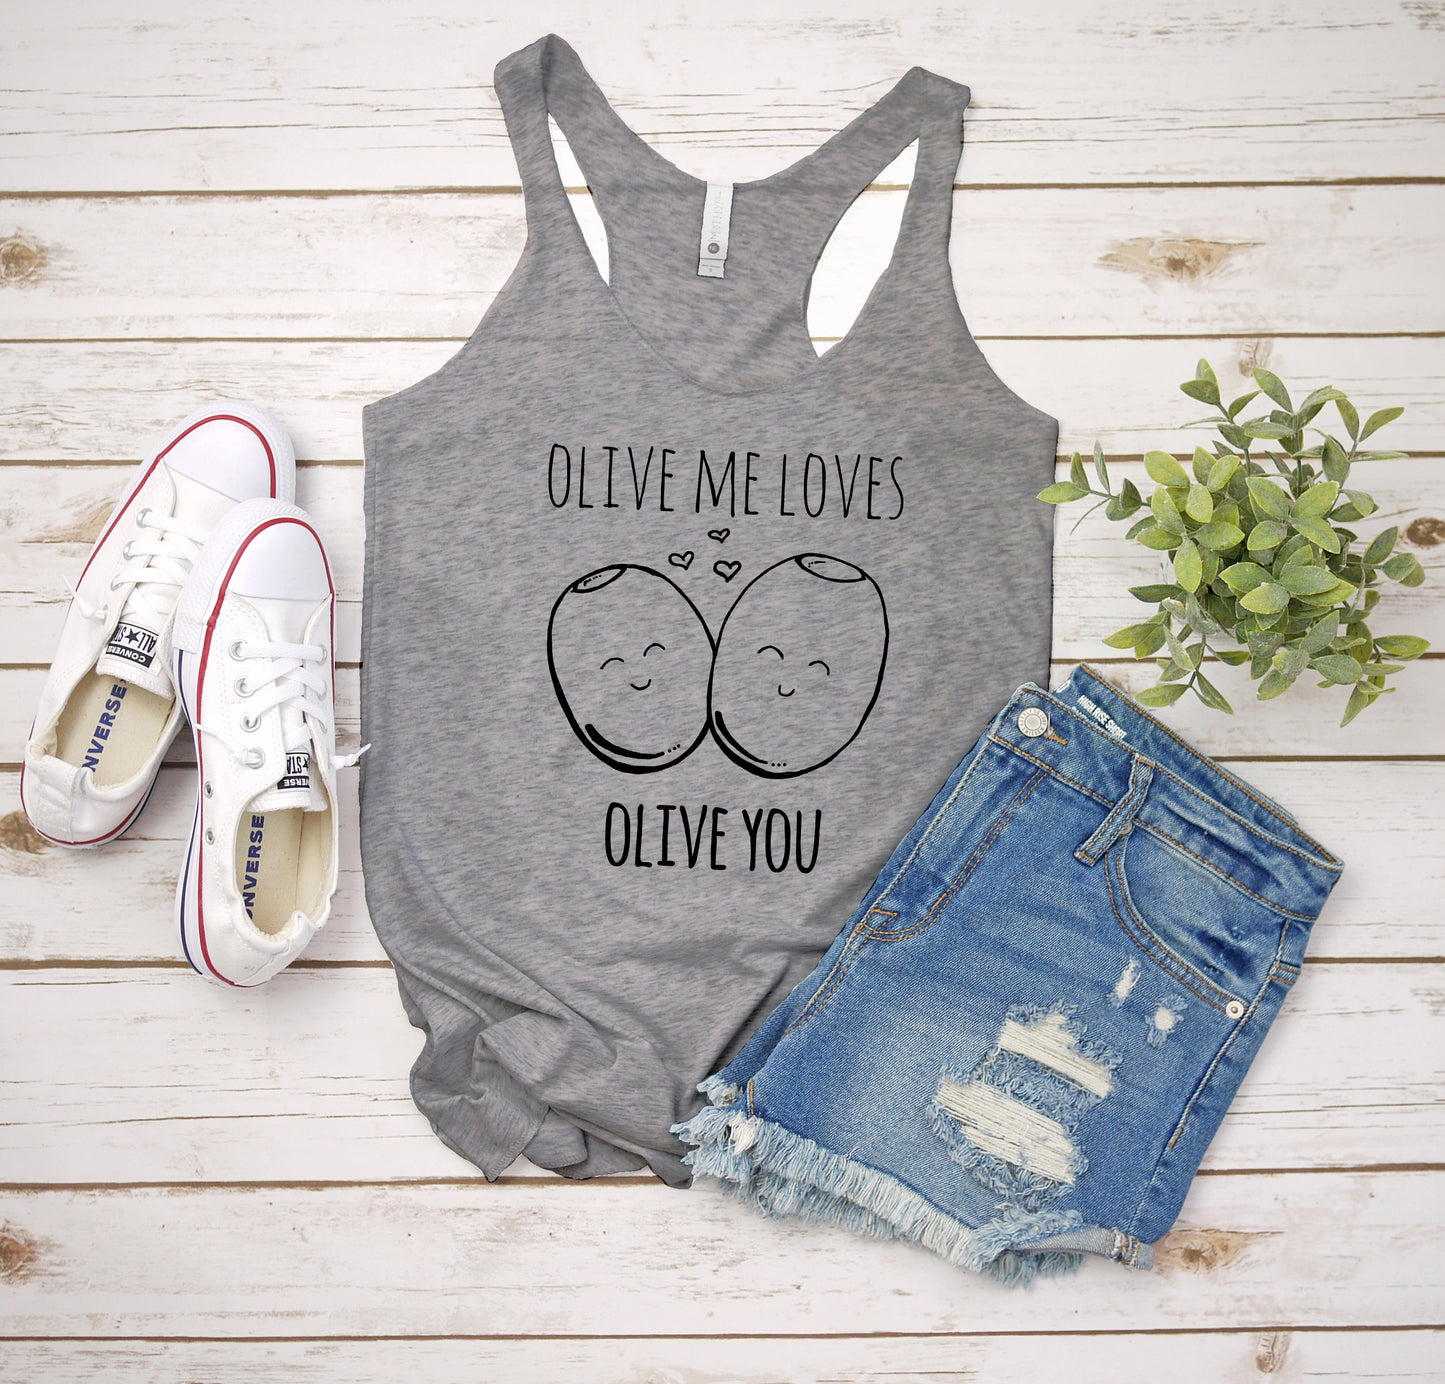 Olive Me Loves Olive You - Women's Tank - Heather Gray, Tahiti, or Envy